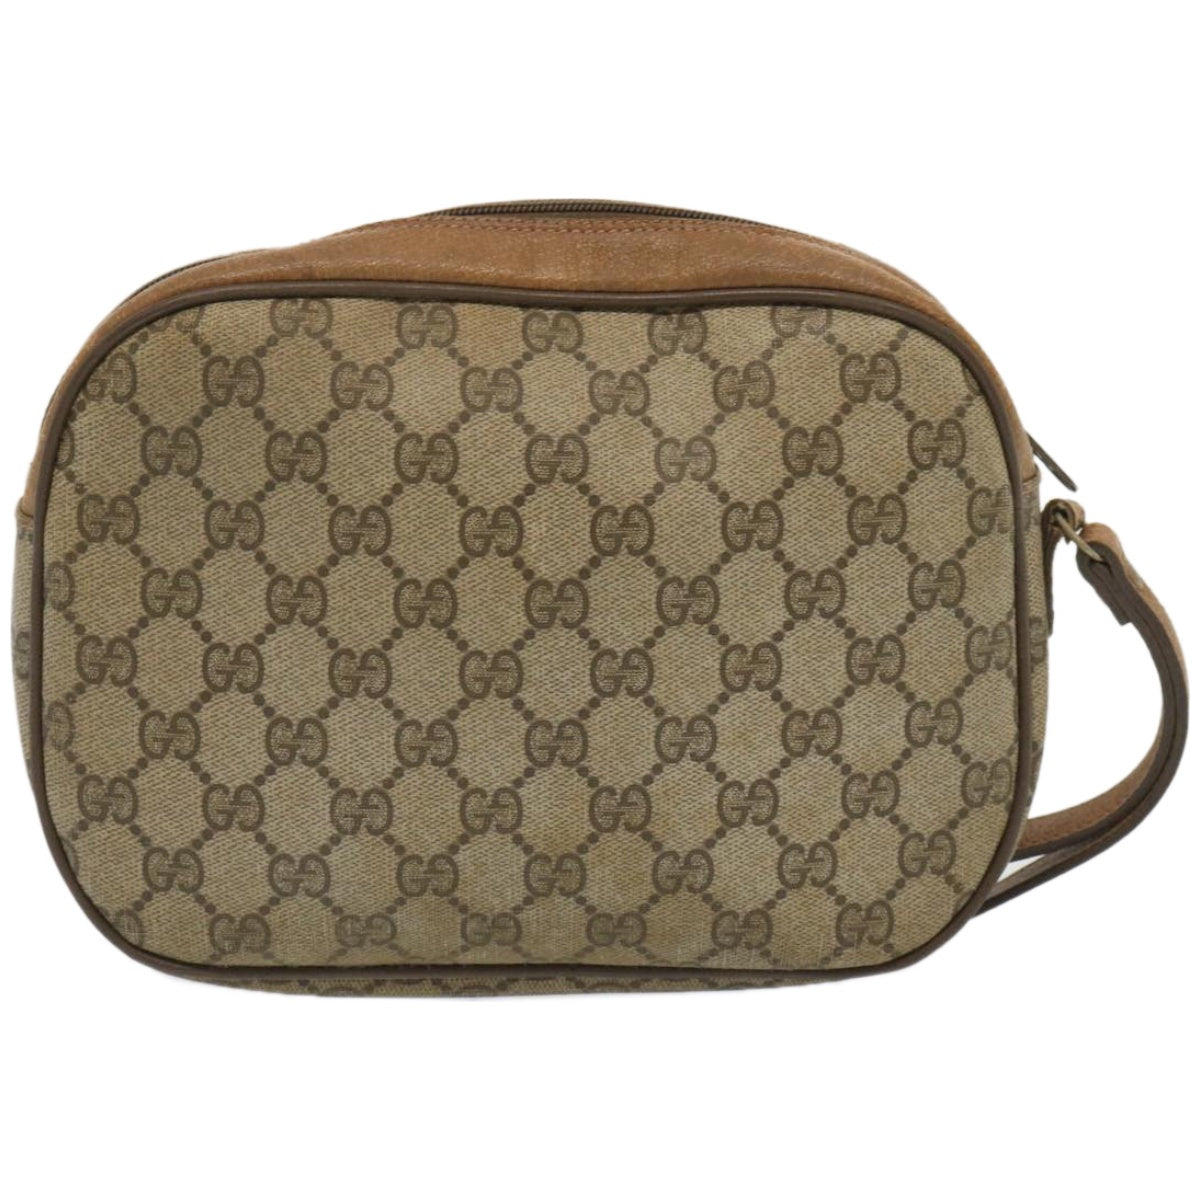 GUCCI GG Supreme Web Sherry Line Clutch Bag Beige Red Green 89 01 034 Auth 67426 - 0